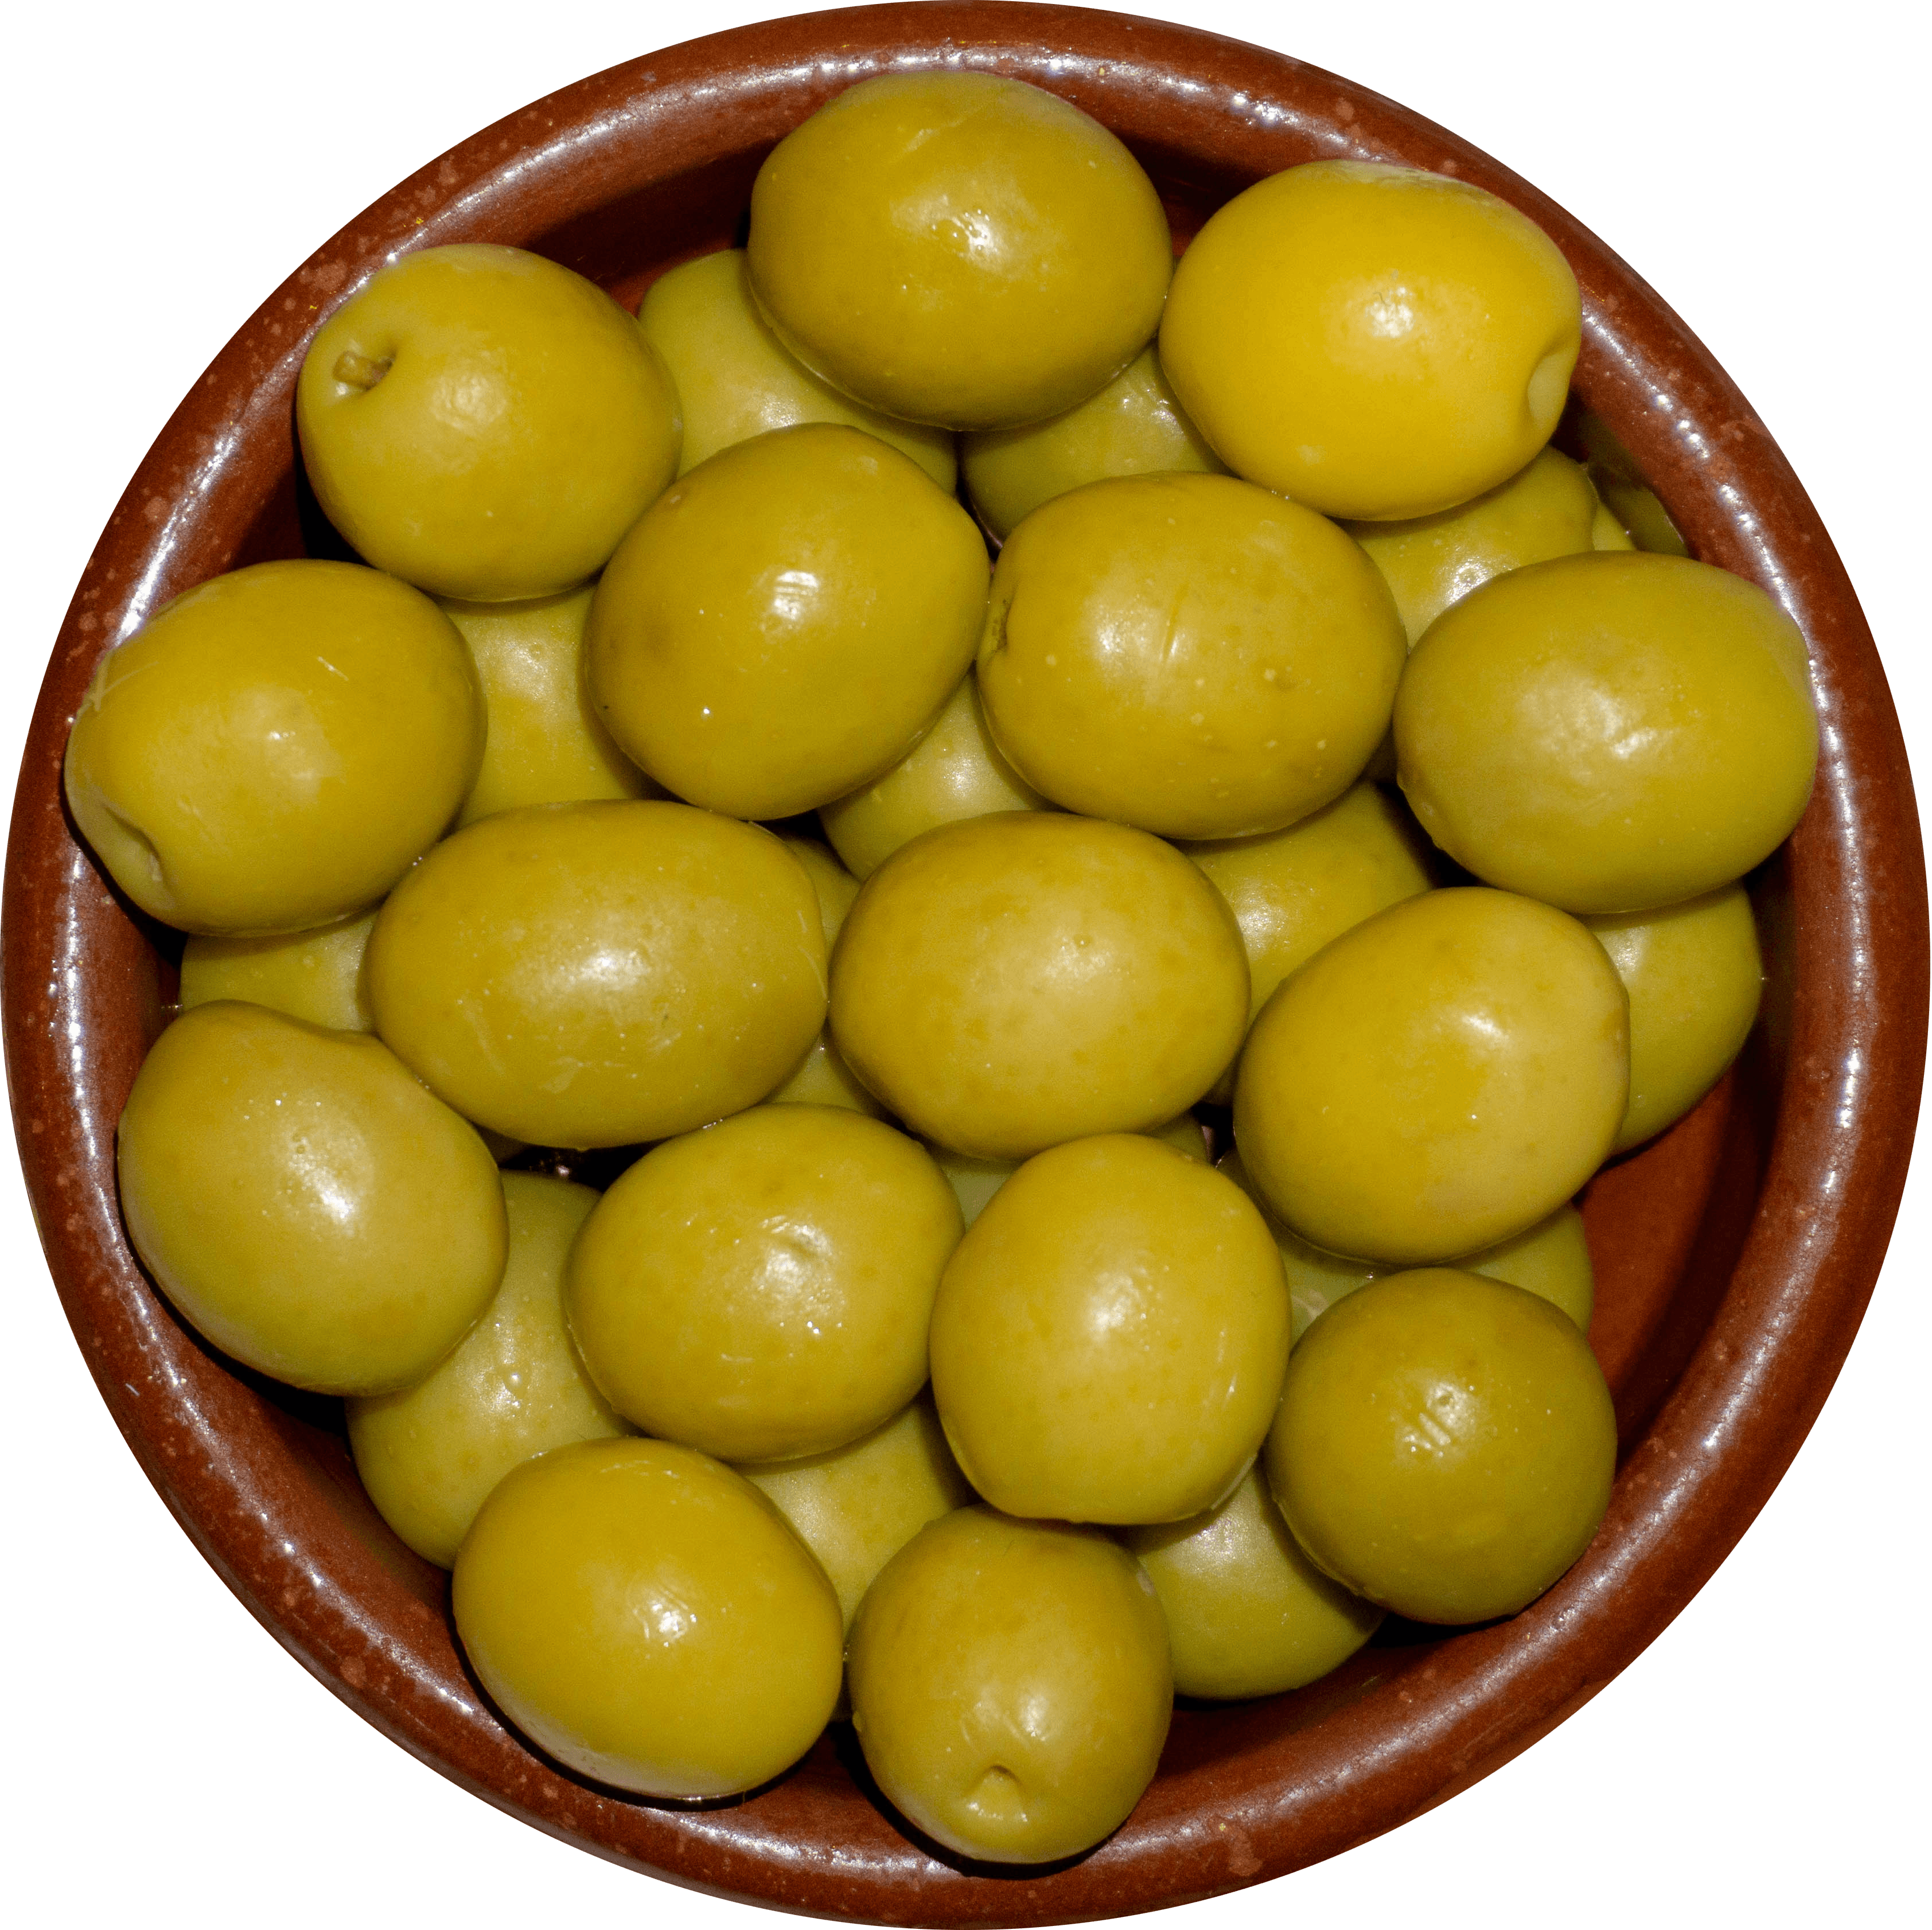 Plain Manzanilla olives with stone - Olives and more London